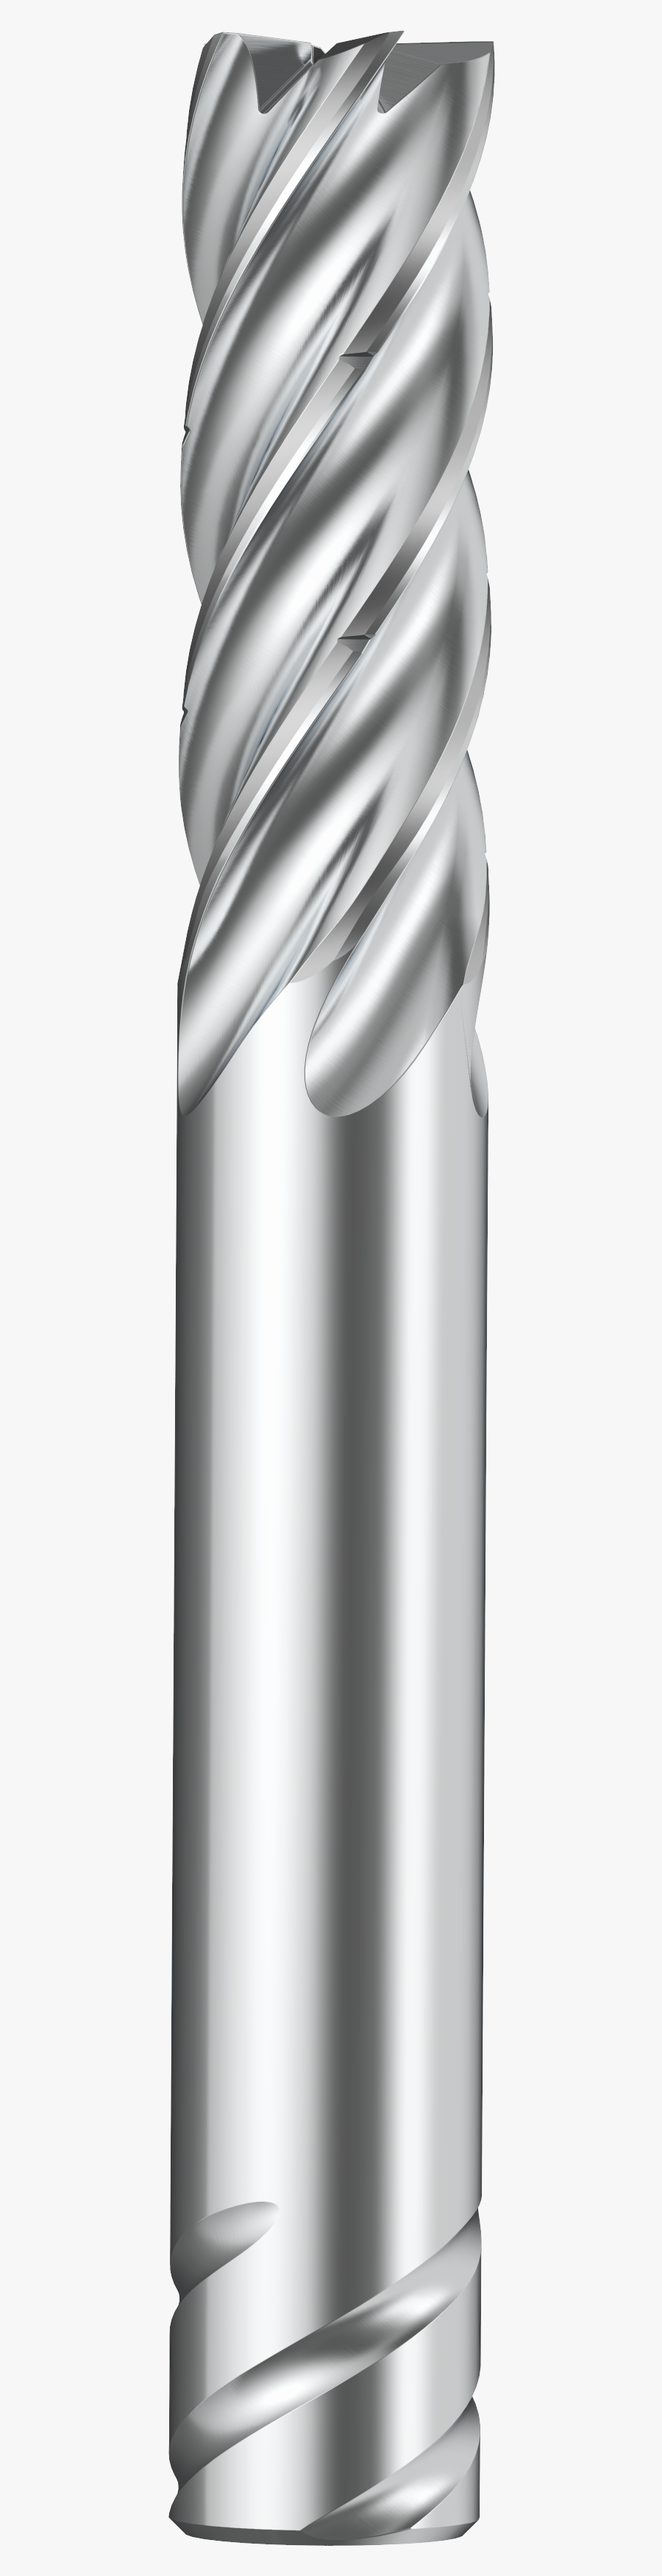 End Mill 4 Flute Stub Length All Sizes And Ballnose - Kor 5 Kennametal, Transparent Clipart